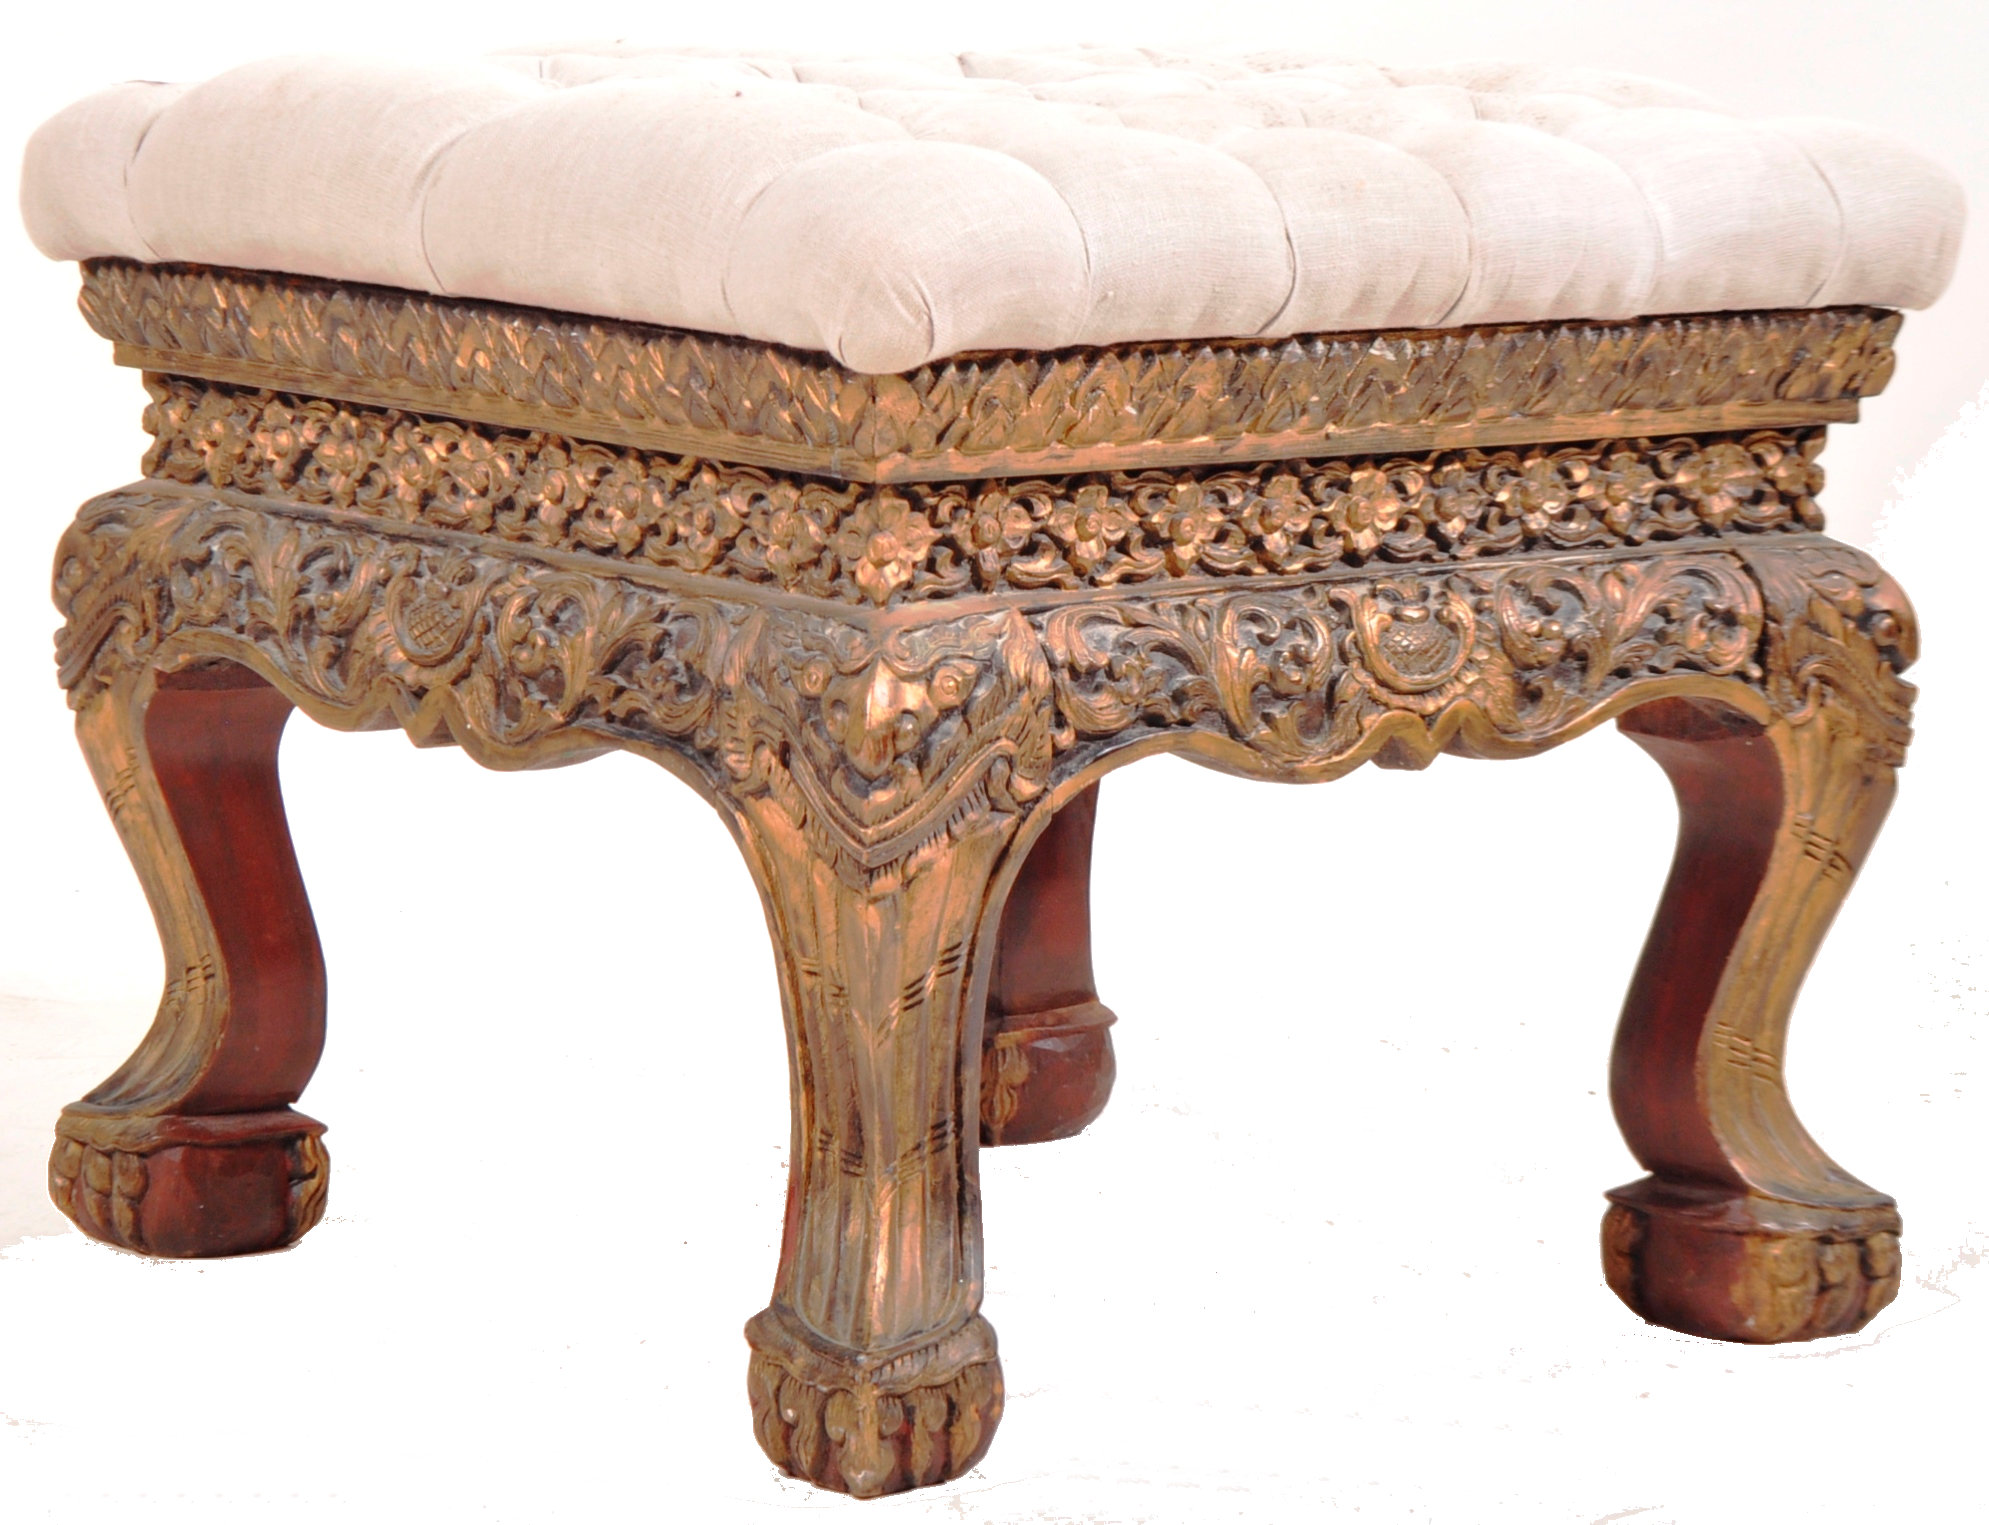 EARLY 20TH CENTURY FRENCH CARVED BALINESE INFLUENCE FOOTSTOOL